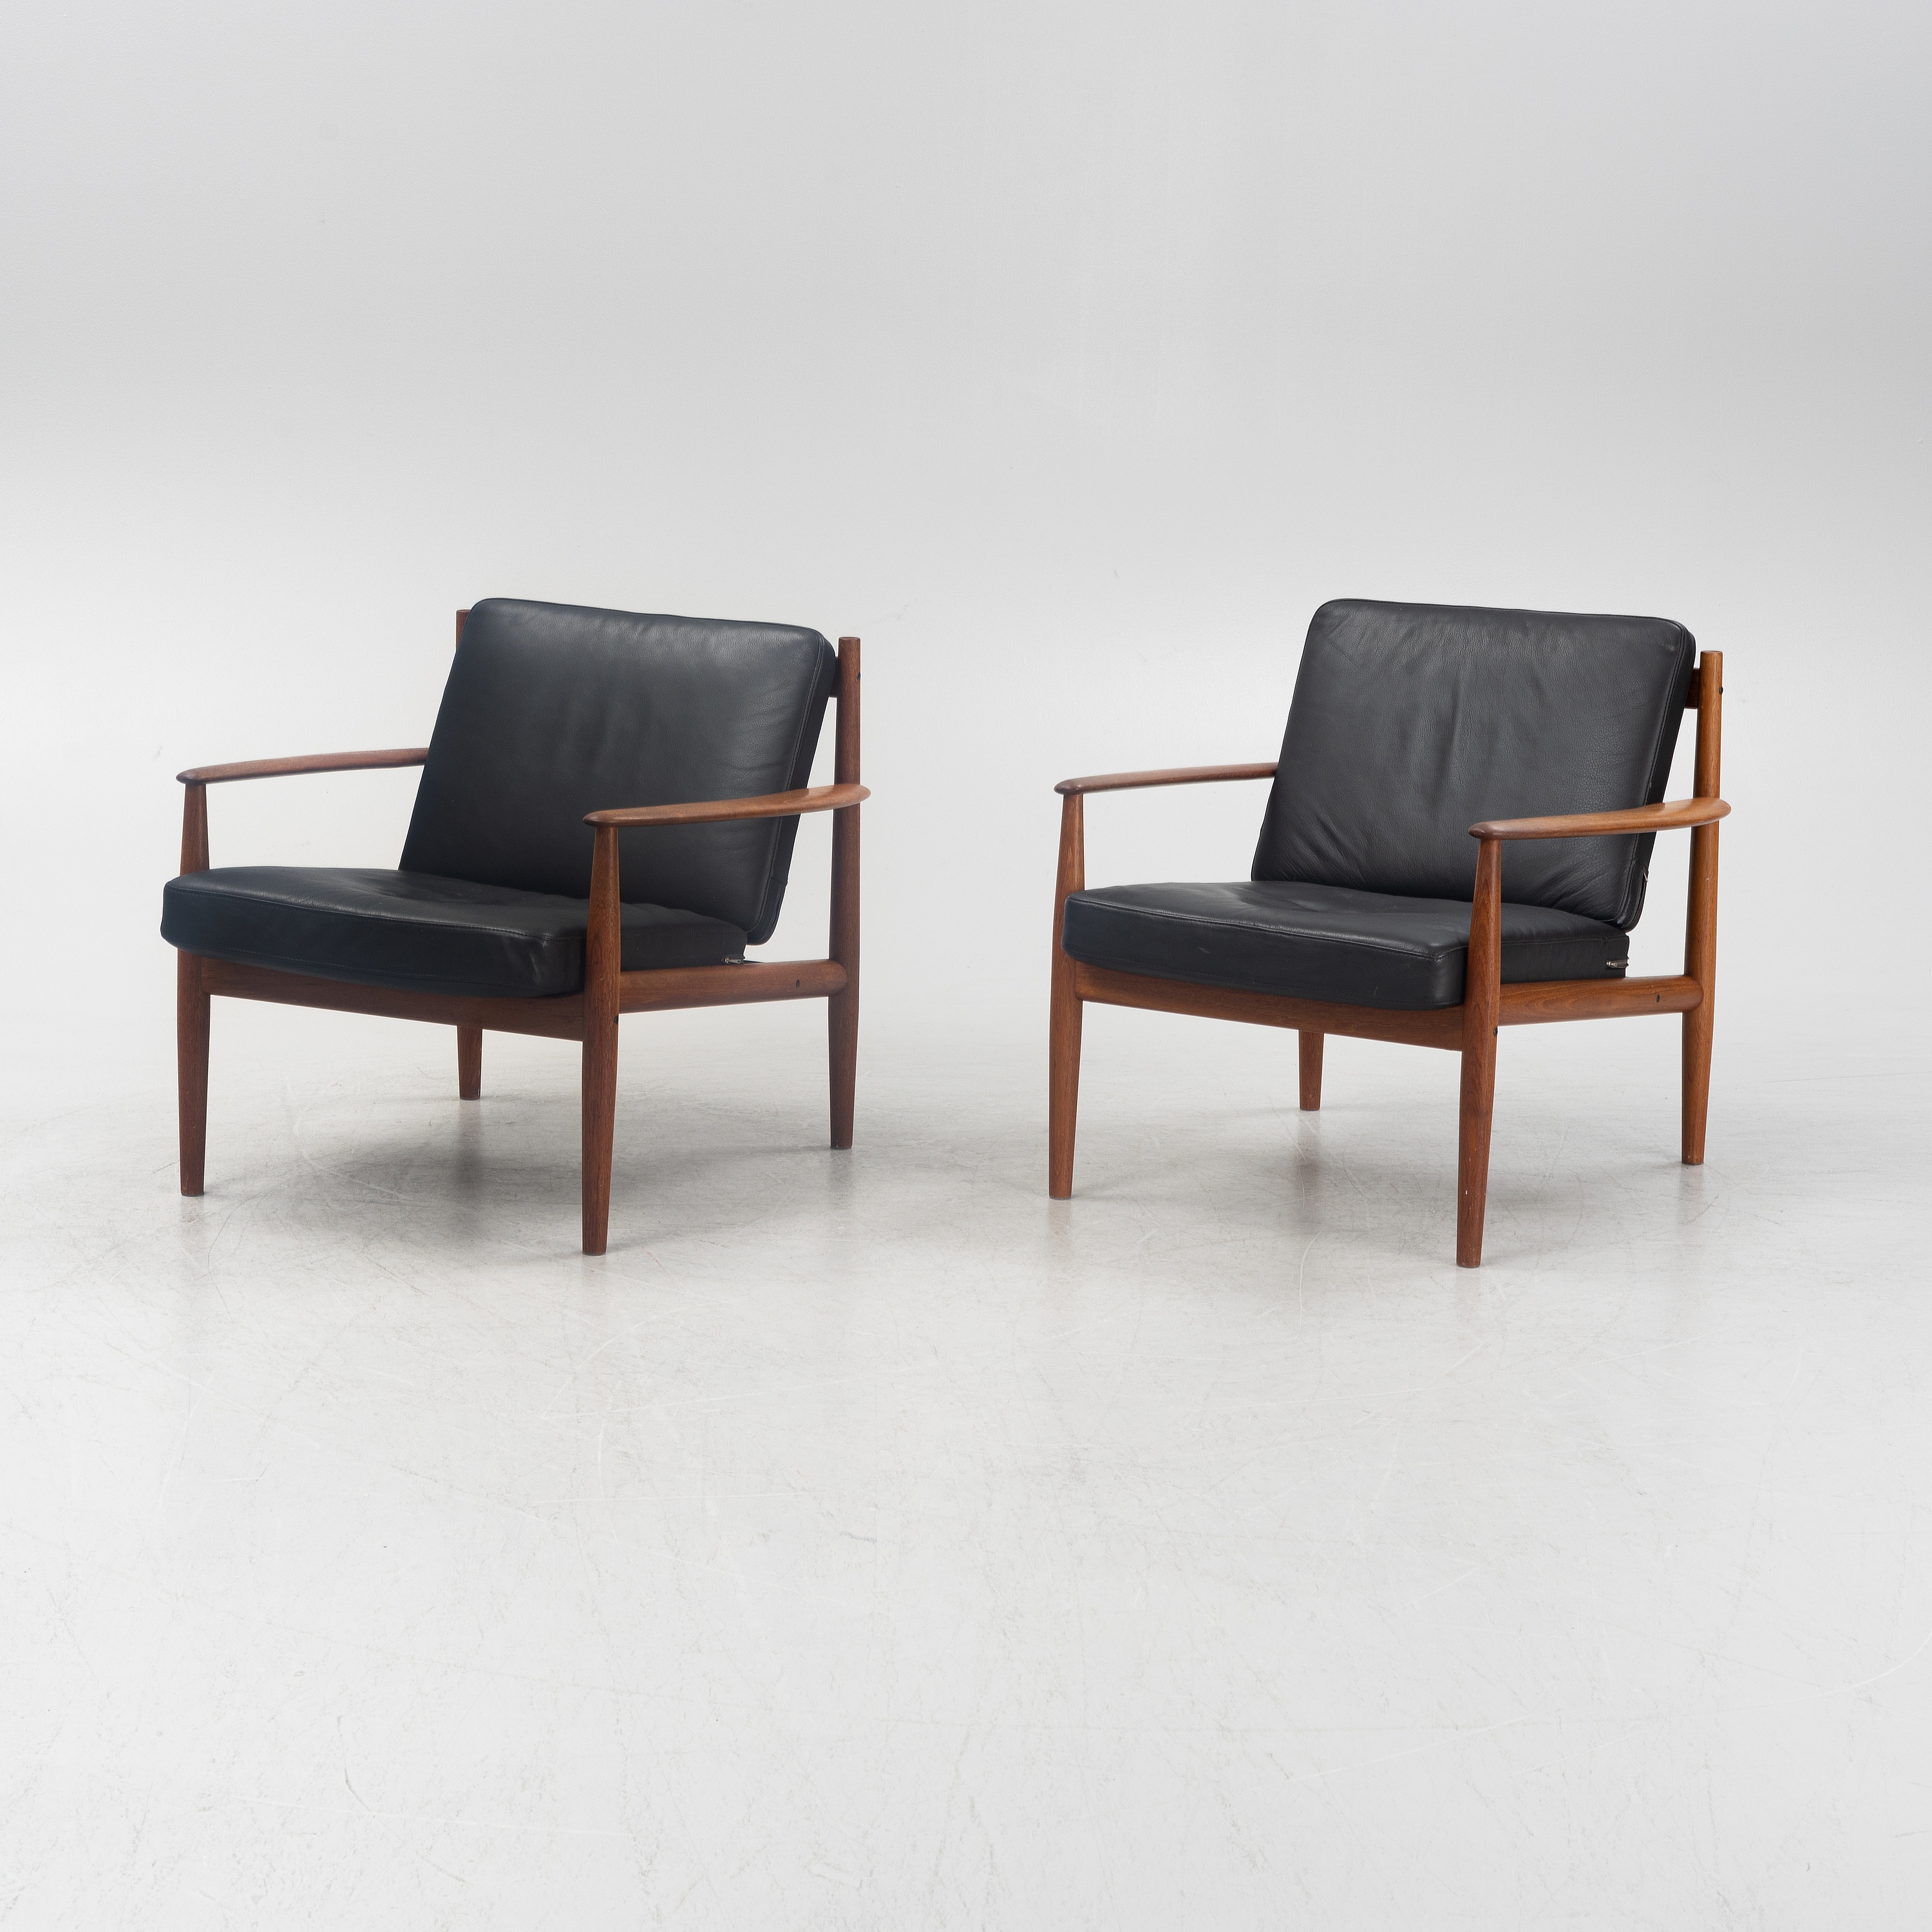 a pair of model '118' teak easy chairs, France & Son, Denmark, 1960's by Grete Jalk, 1960